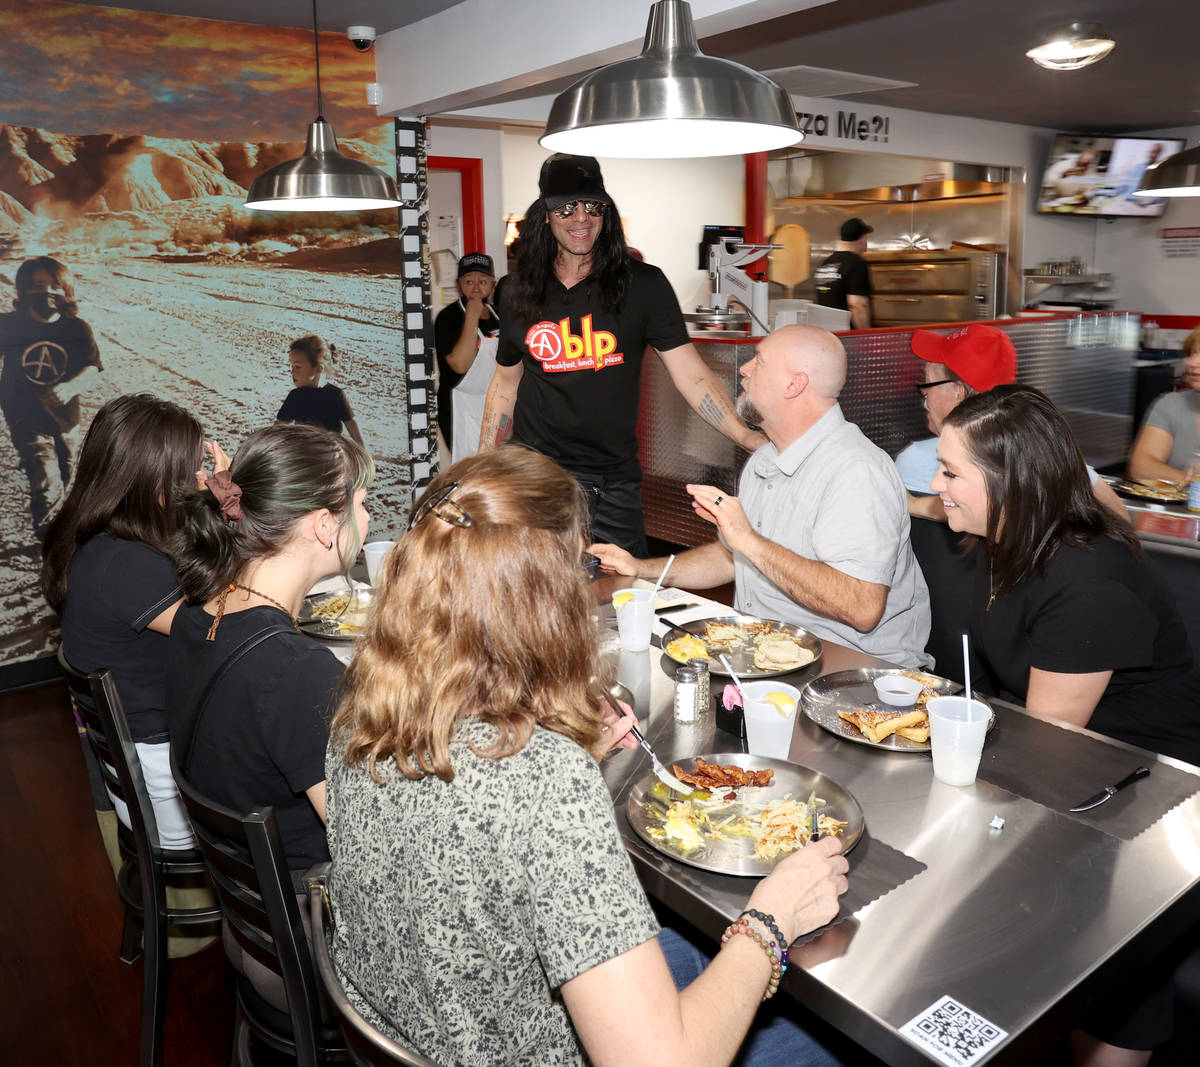 Criss Angel greets guests at his new restaurant, CABLP, in Overton during the grand opening Fri ...